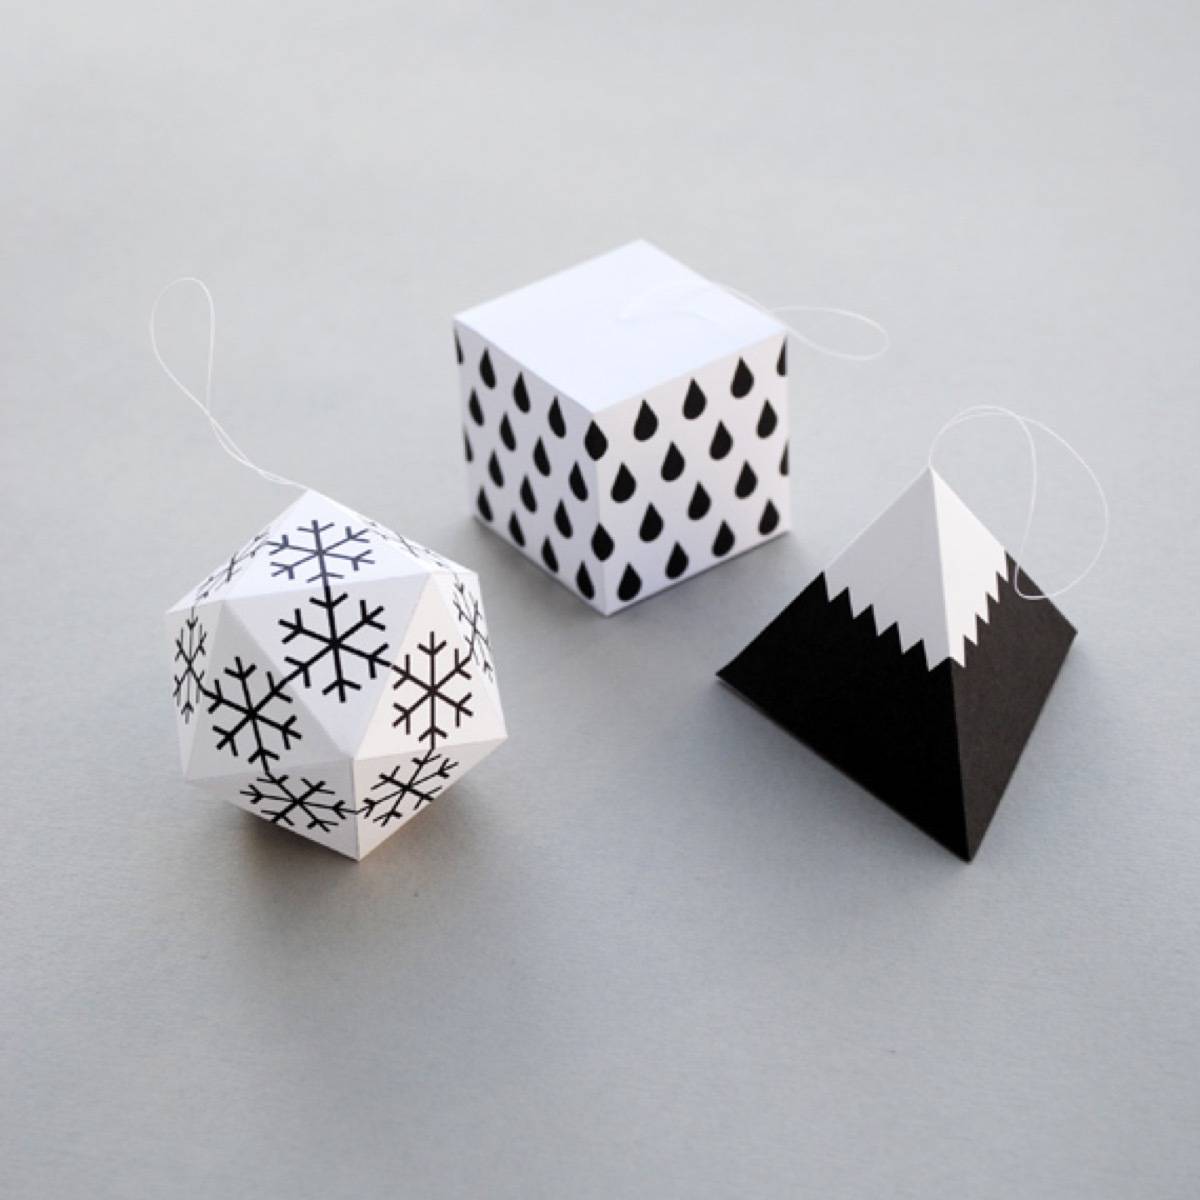 Printable black and white ornaments